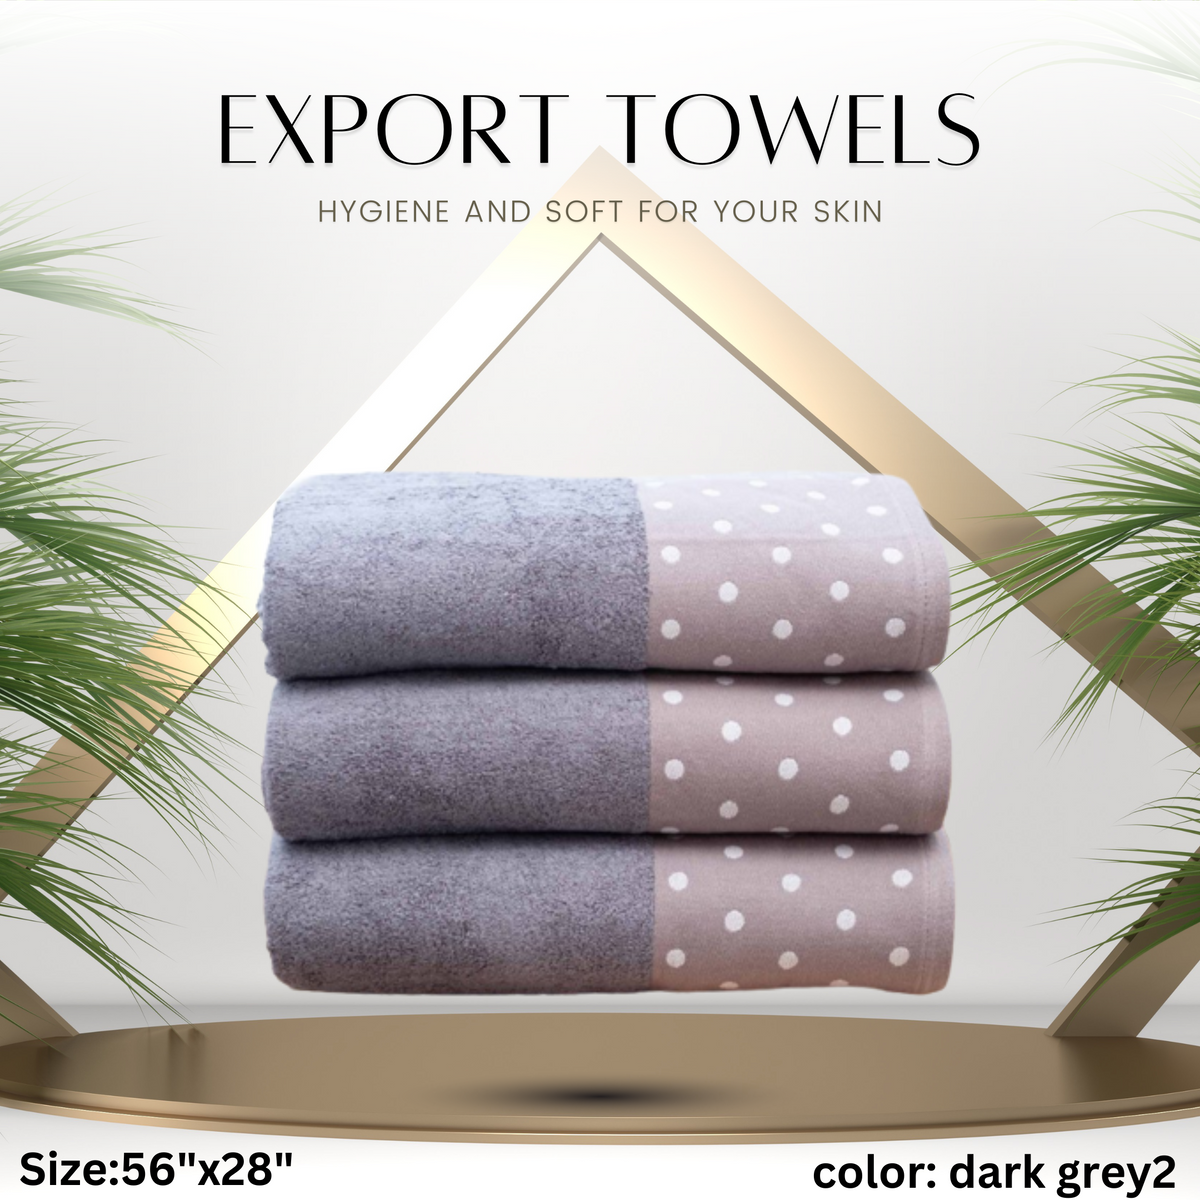 Experience the Softness and Absorbency of Our Bamboo Towels  - Ultra-soft and gentle on skin - Highly absorbent and quick-drying - Eco-friendly and sustainable bamboo material - Hypoallergenic and antibacterial properties - Perfect for bath, beach, or gym use  Upgrade your towel game with our luxurious bamboo towels! Soft, absorbent, and eco-friendly, they're perfect for anyone looking for a comfortable and sustainable bathing experience.